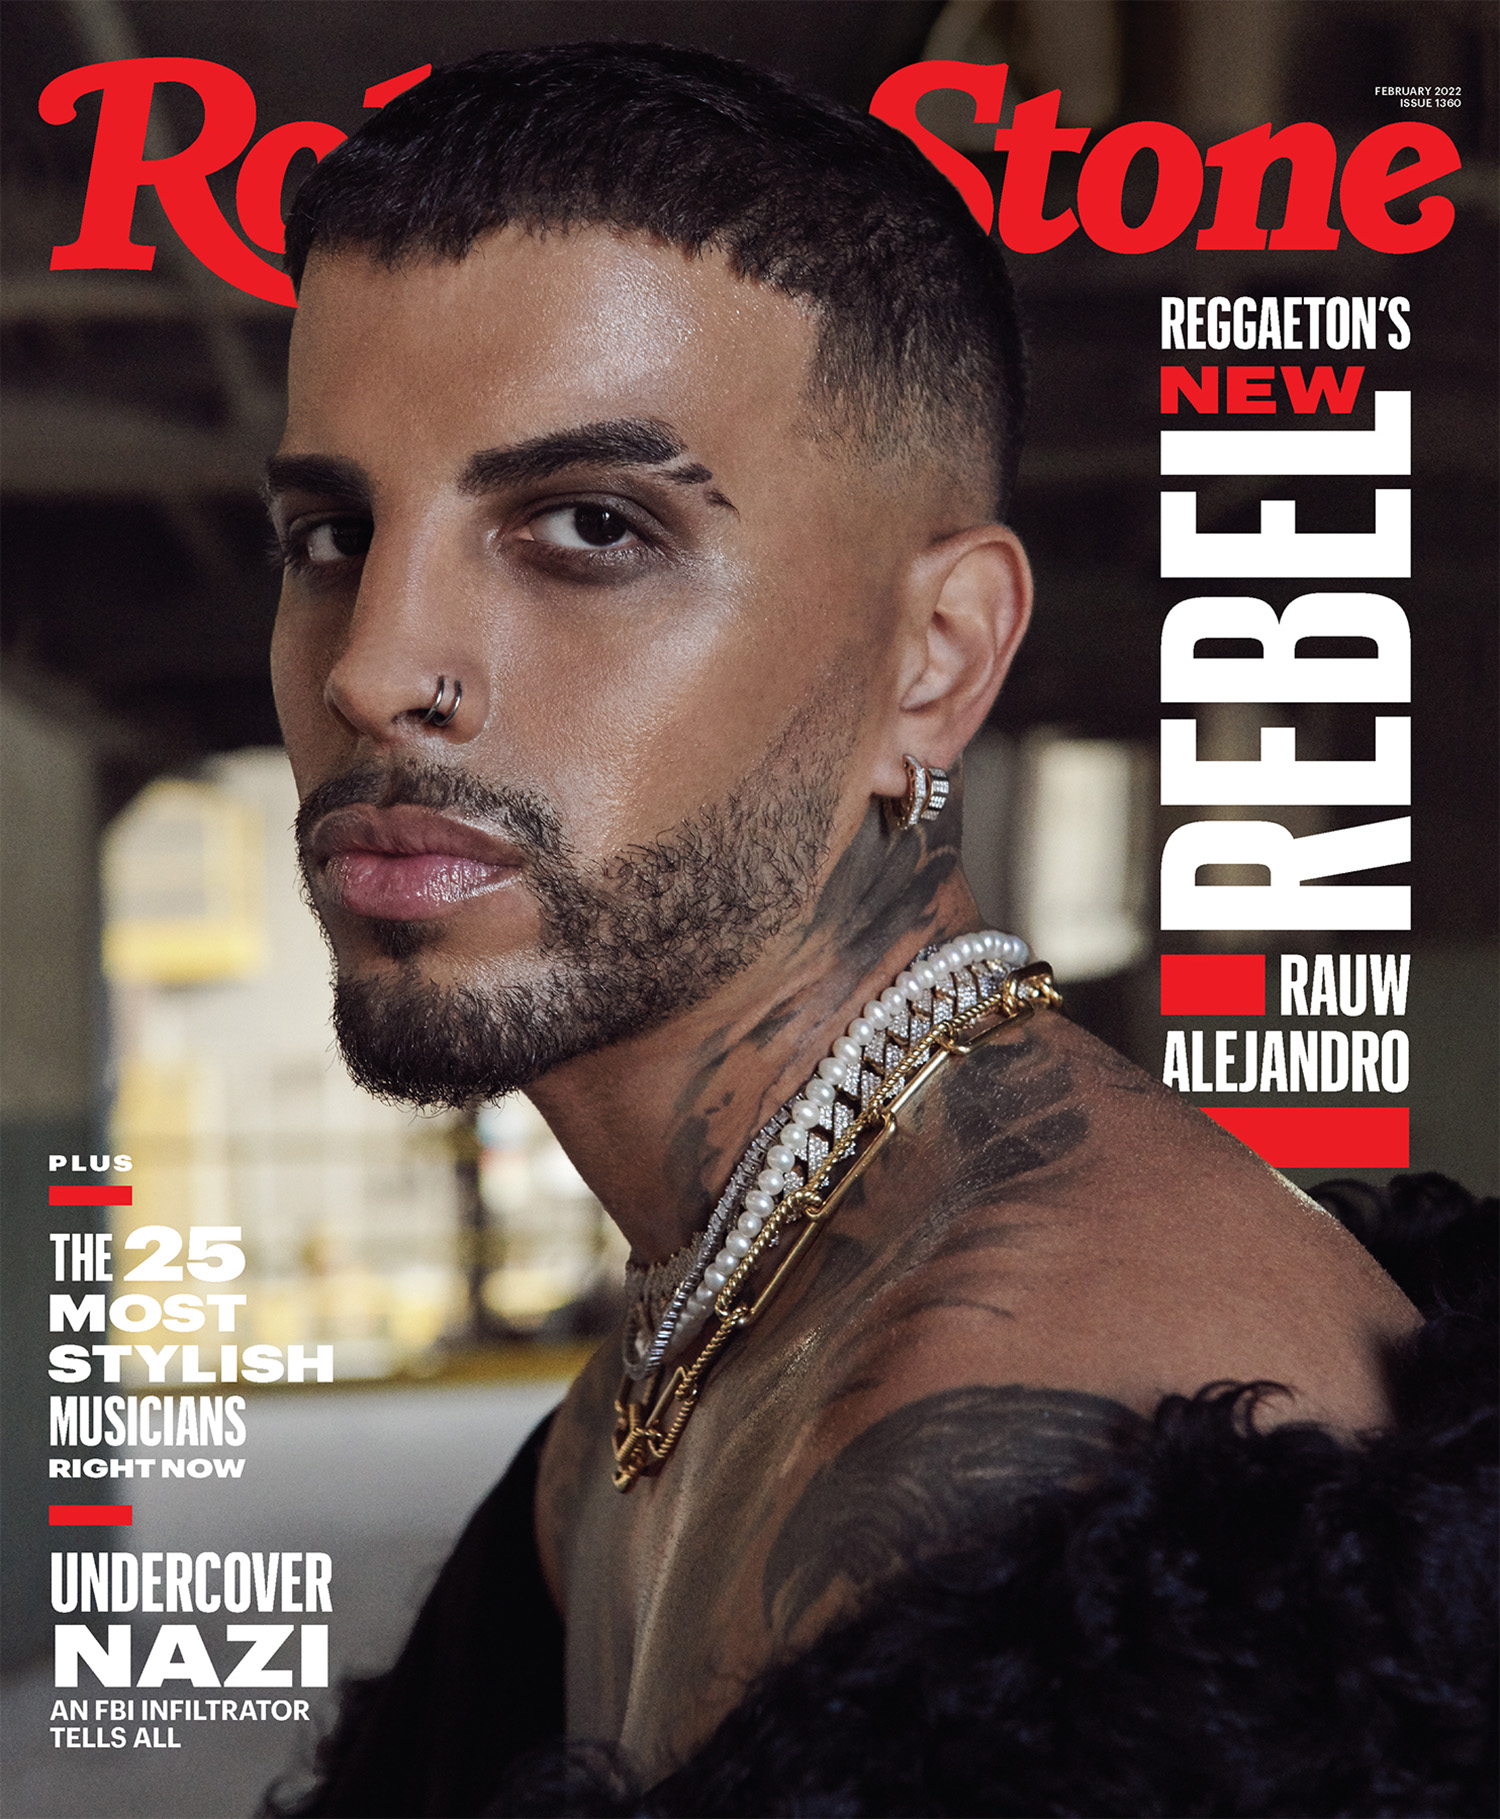 Rauw Alejandro covers Rolling Stone February 2022 by Ruvén Afanador